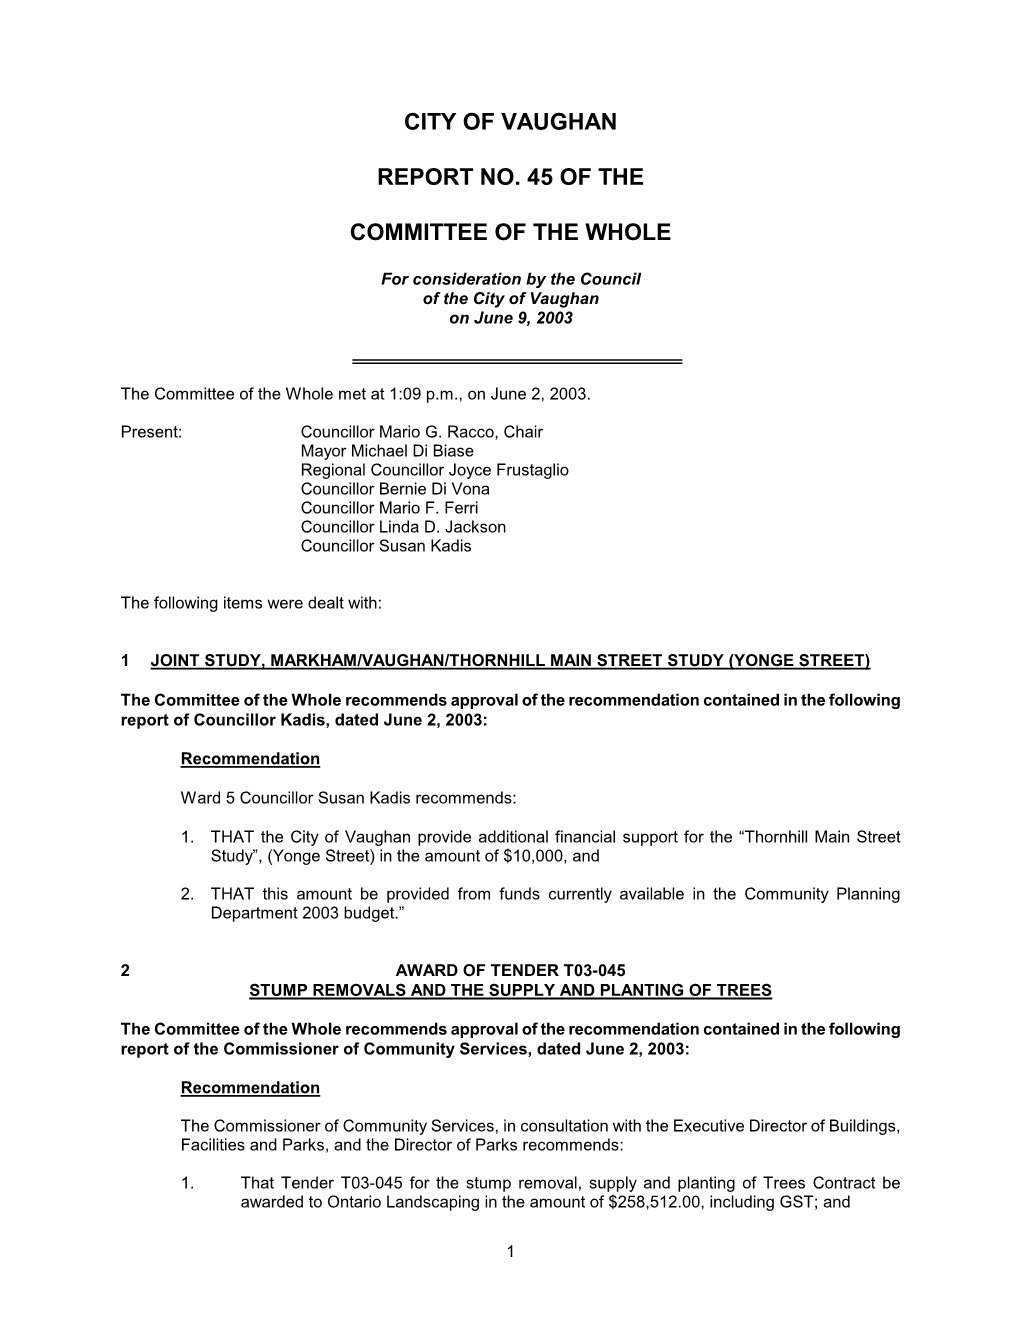 City of Vaughan Report No. 45 of the Committee of the Whole